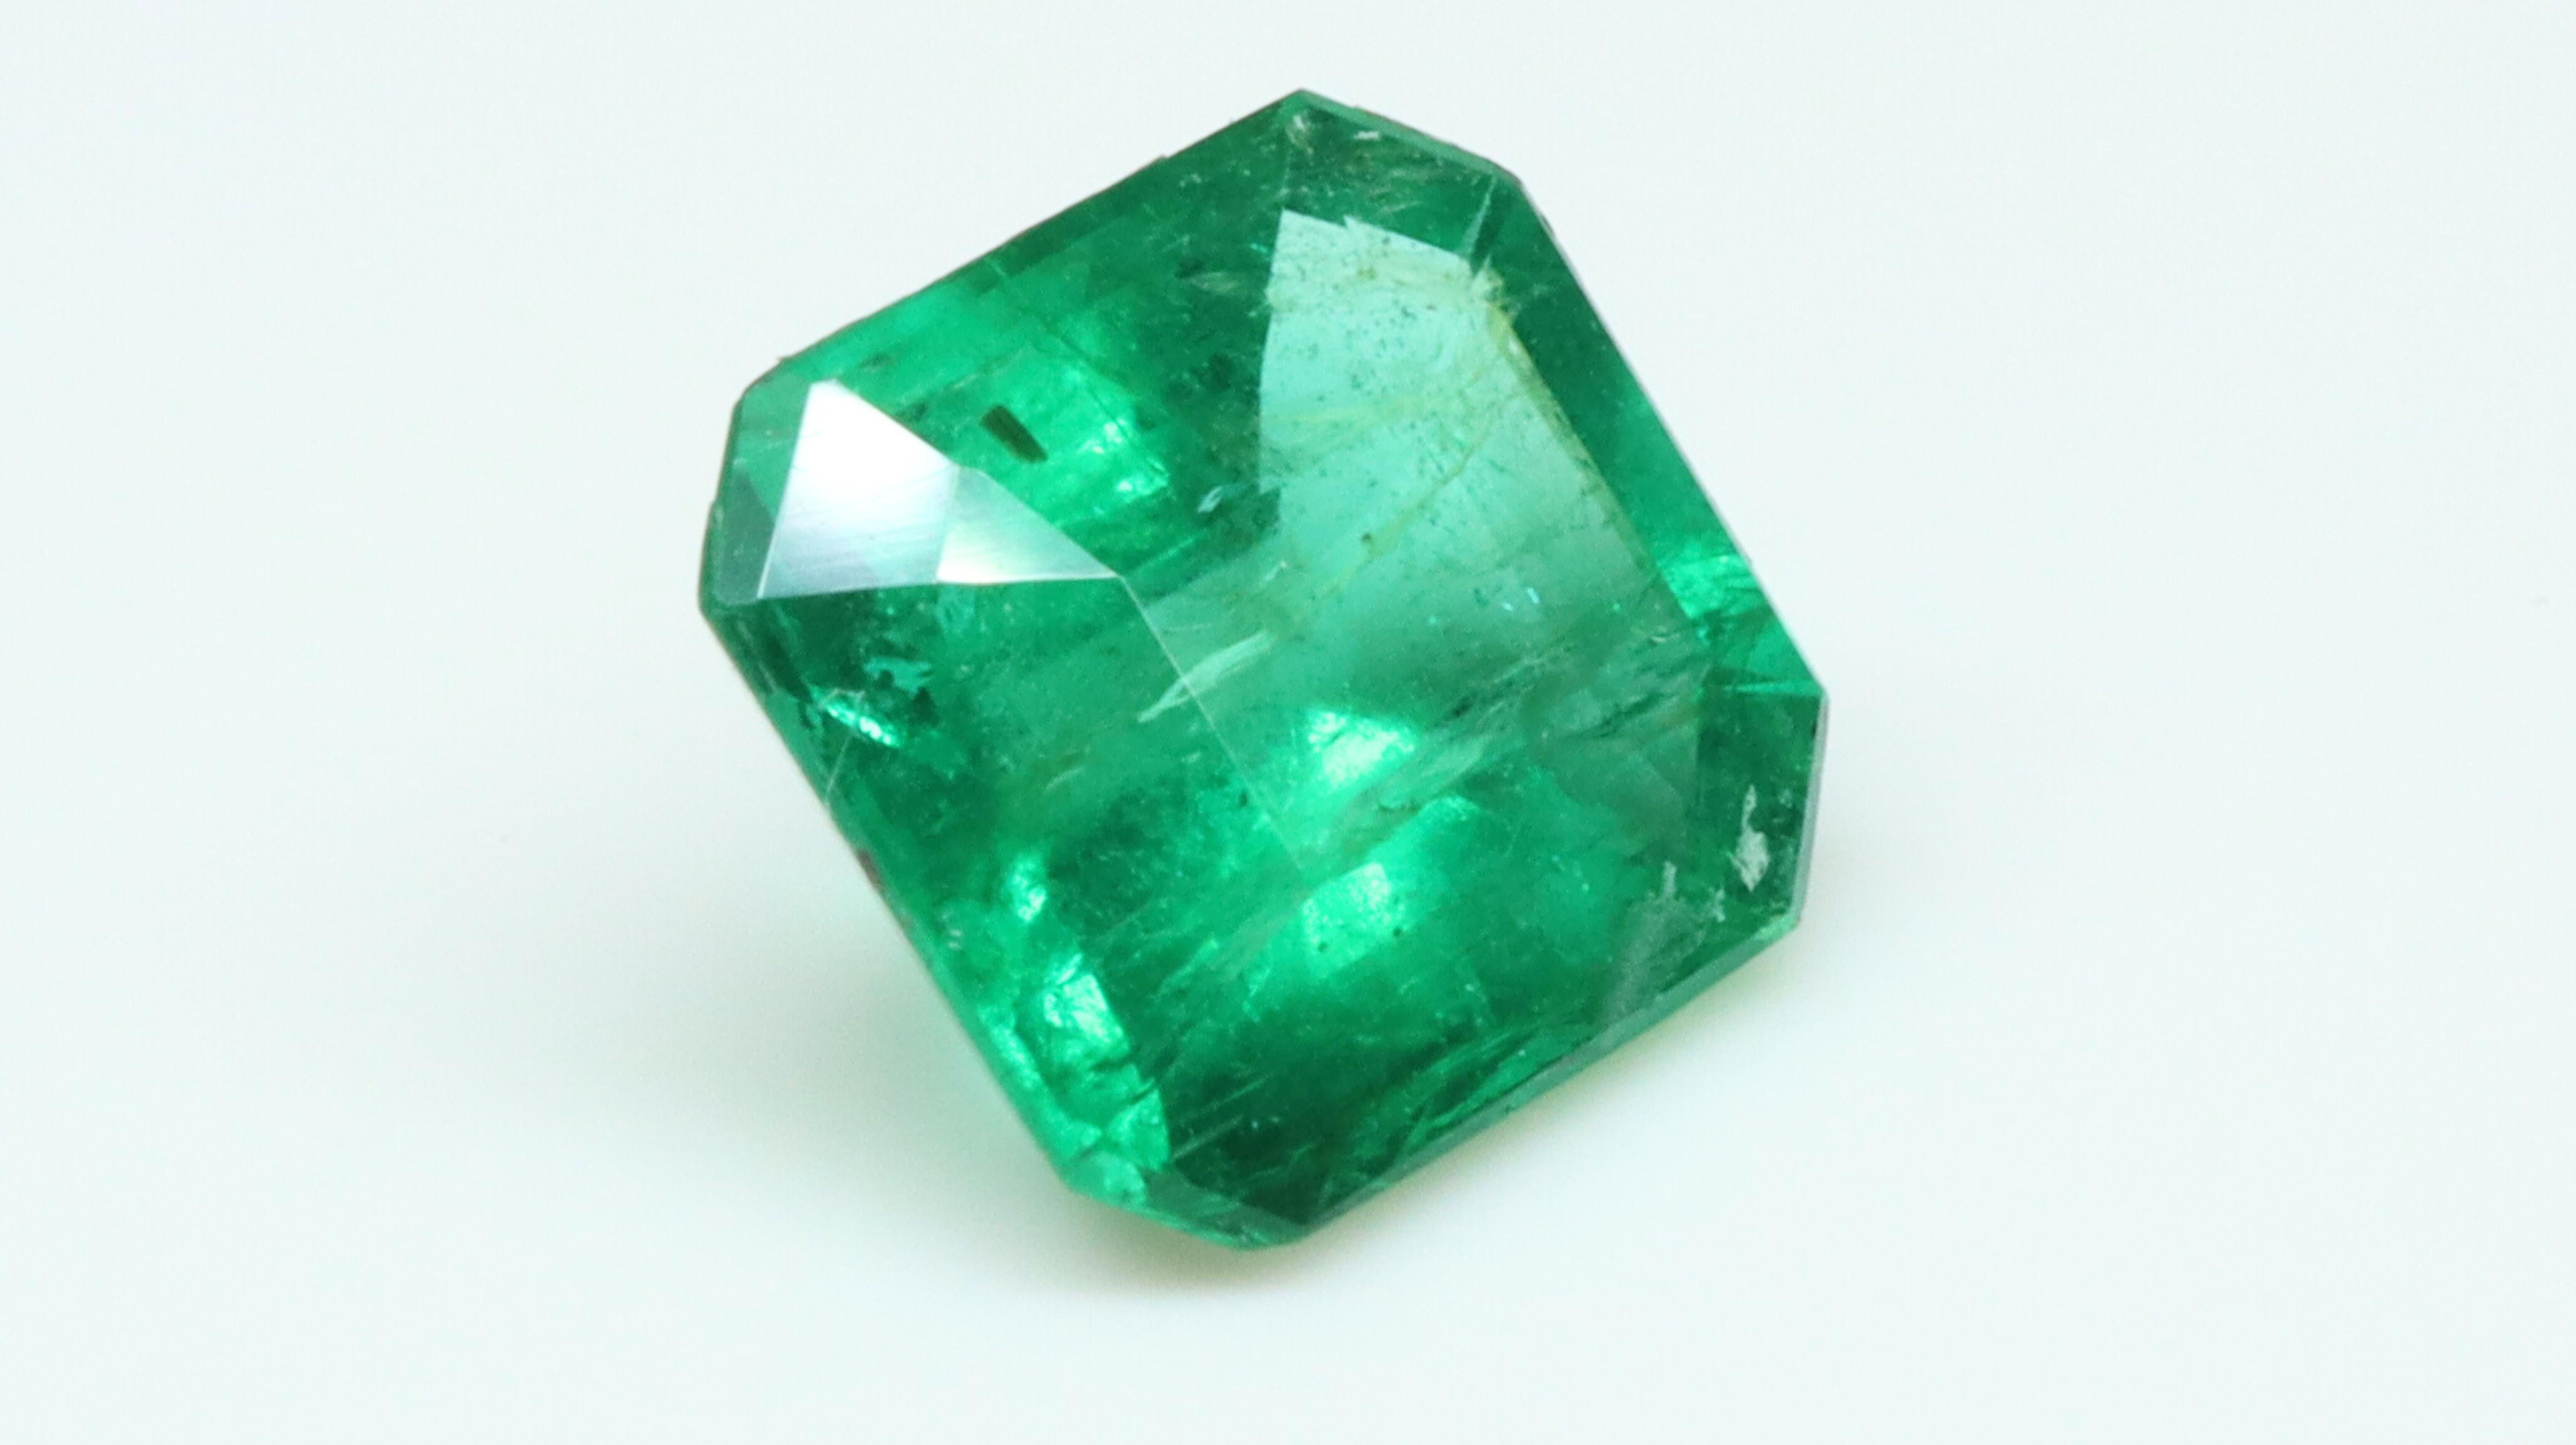 This Emerald has a very intense Green tone,  with strong hues and distributed color. Inclusions are light in tone and stone is beautiful.

Emeralds are naturally porous and inclusive stones, with surface reaching fractures and in order to improve